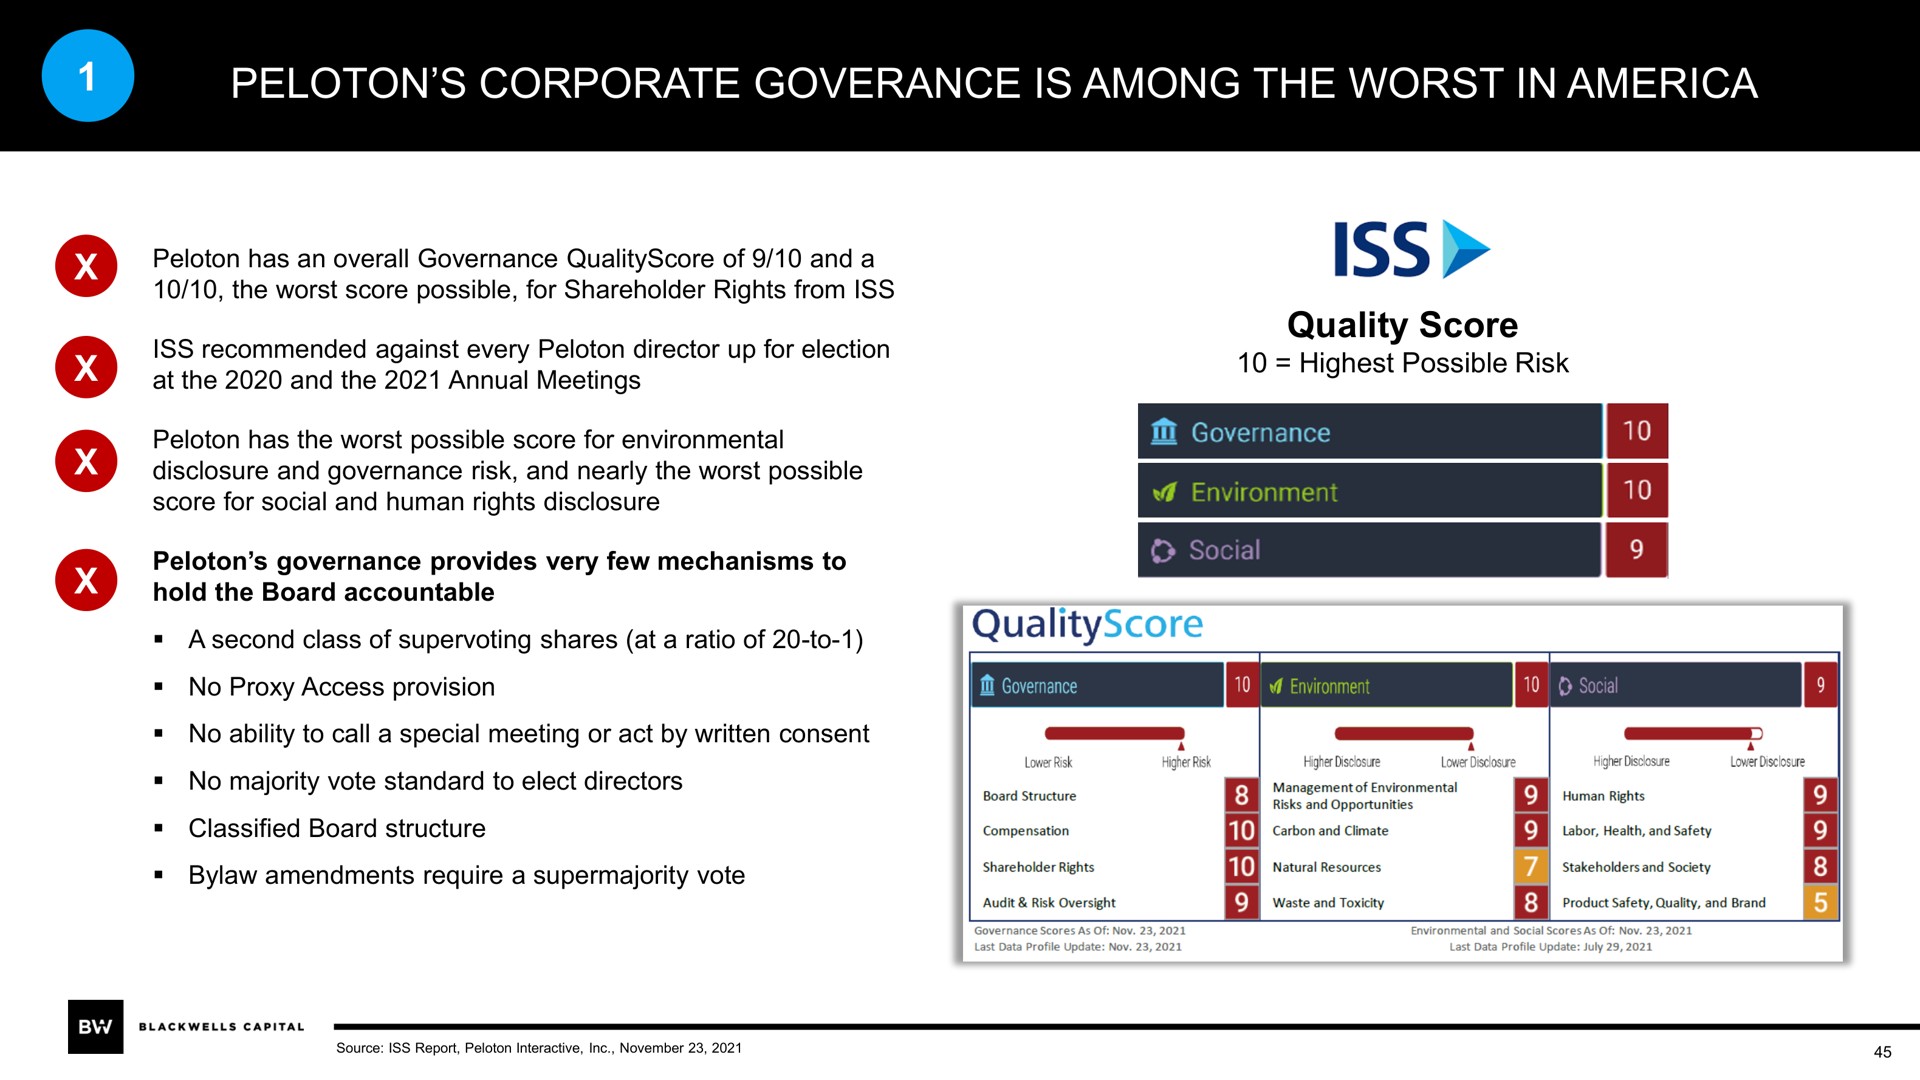 peloton corporate is among the worst in iss | Blackwells Capital